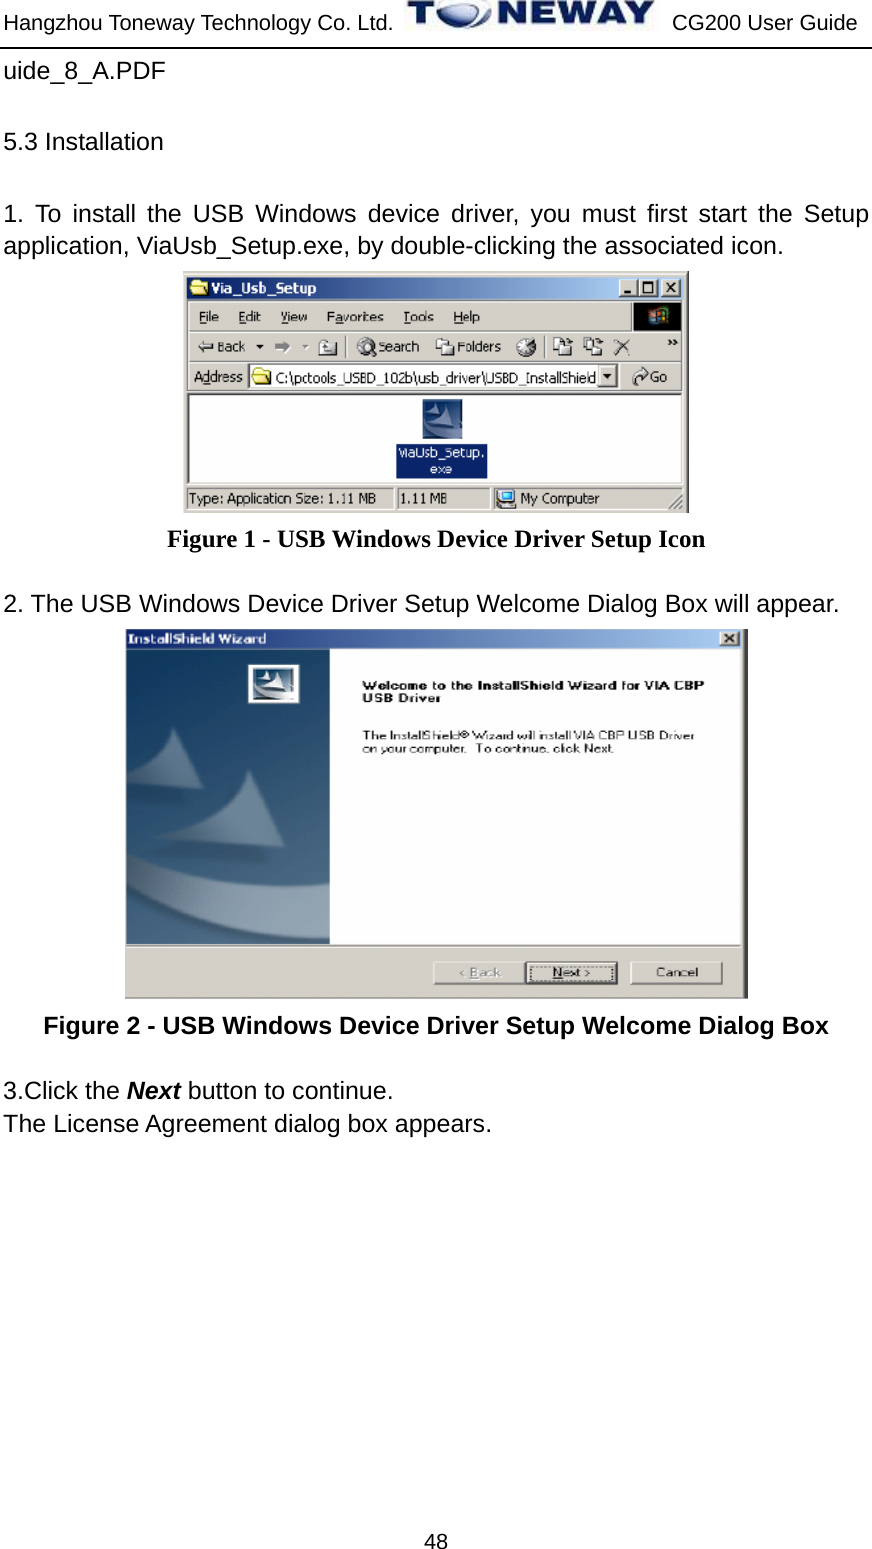 Hangzhou Toneway Technology Co. Ltd.    CG200 User Guide 48 uide_8_A.PDF 5.3 Installation 1. To install the USB Windows device driver, you must first start the Setup application, ViaUsb_Setup.exe, by double-clicking the associated icon.  Figure 1 - USB Windows Device Driver Setup Icon  2. The USB Windows Device Driver Setup Welcome Dialog Box will appear.  Figure 2 - USB Windows Device Driver Setup Welcome Dialog Box  3.Click the Next button to continue. The License Agreement dialog box appears. 